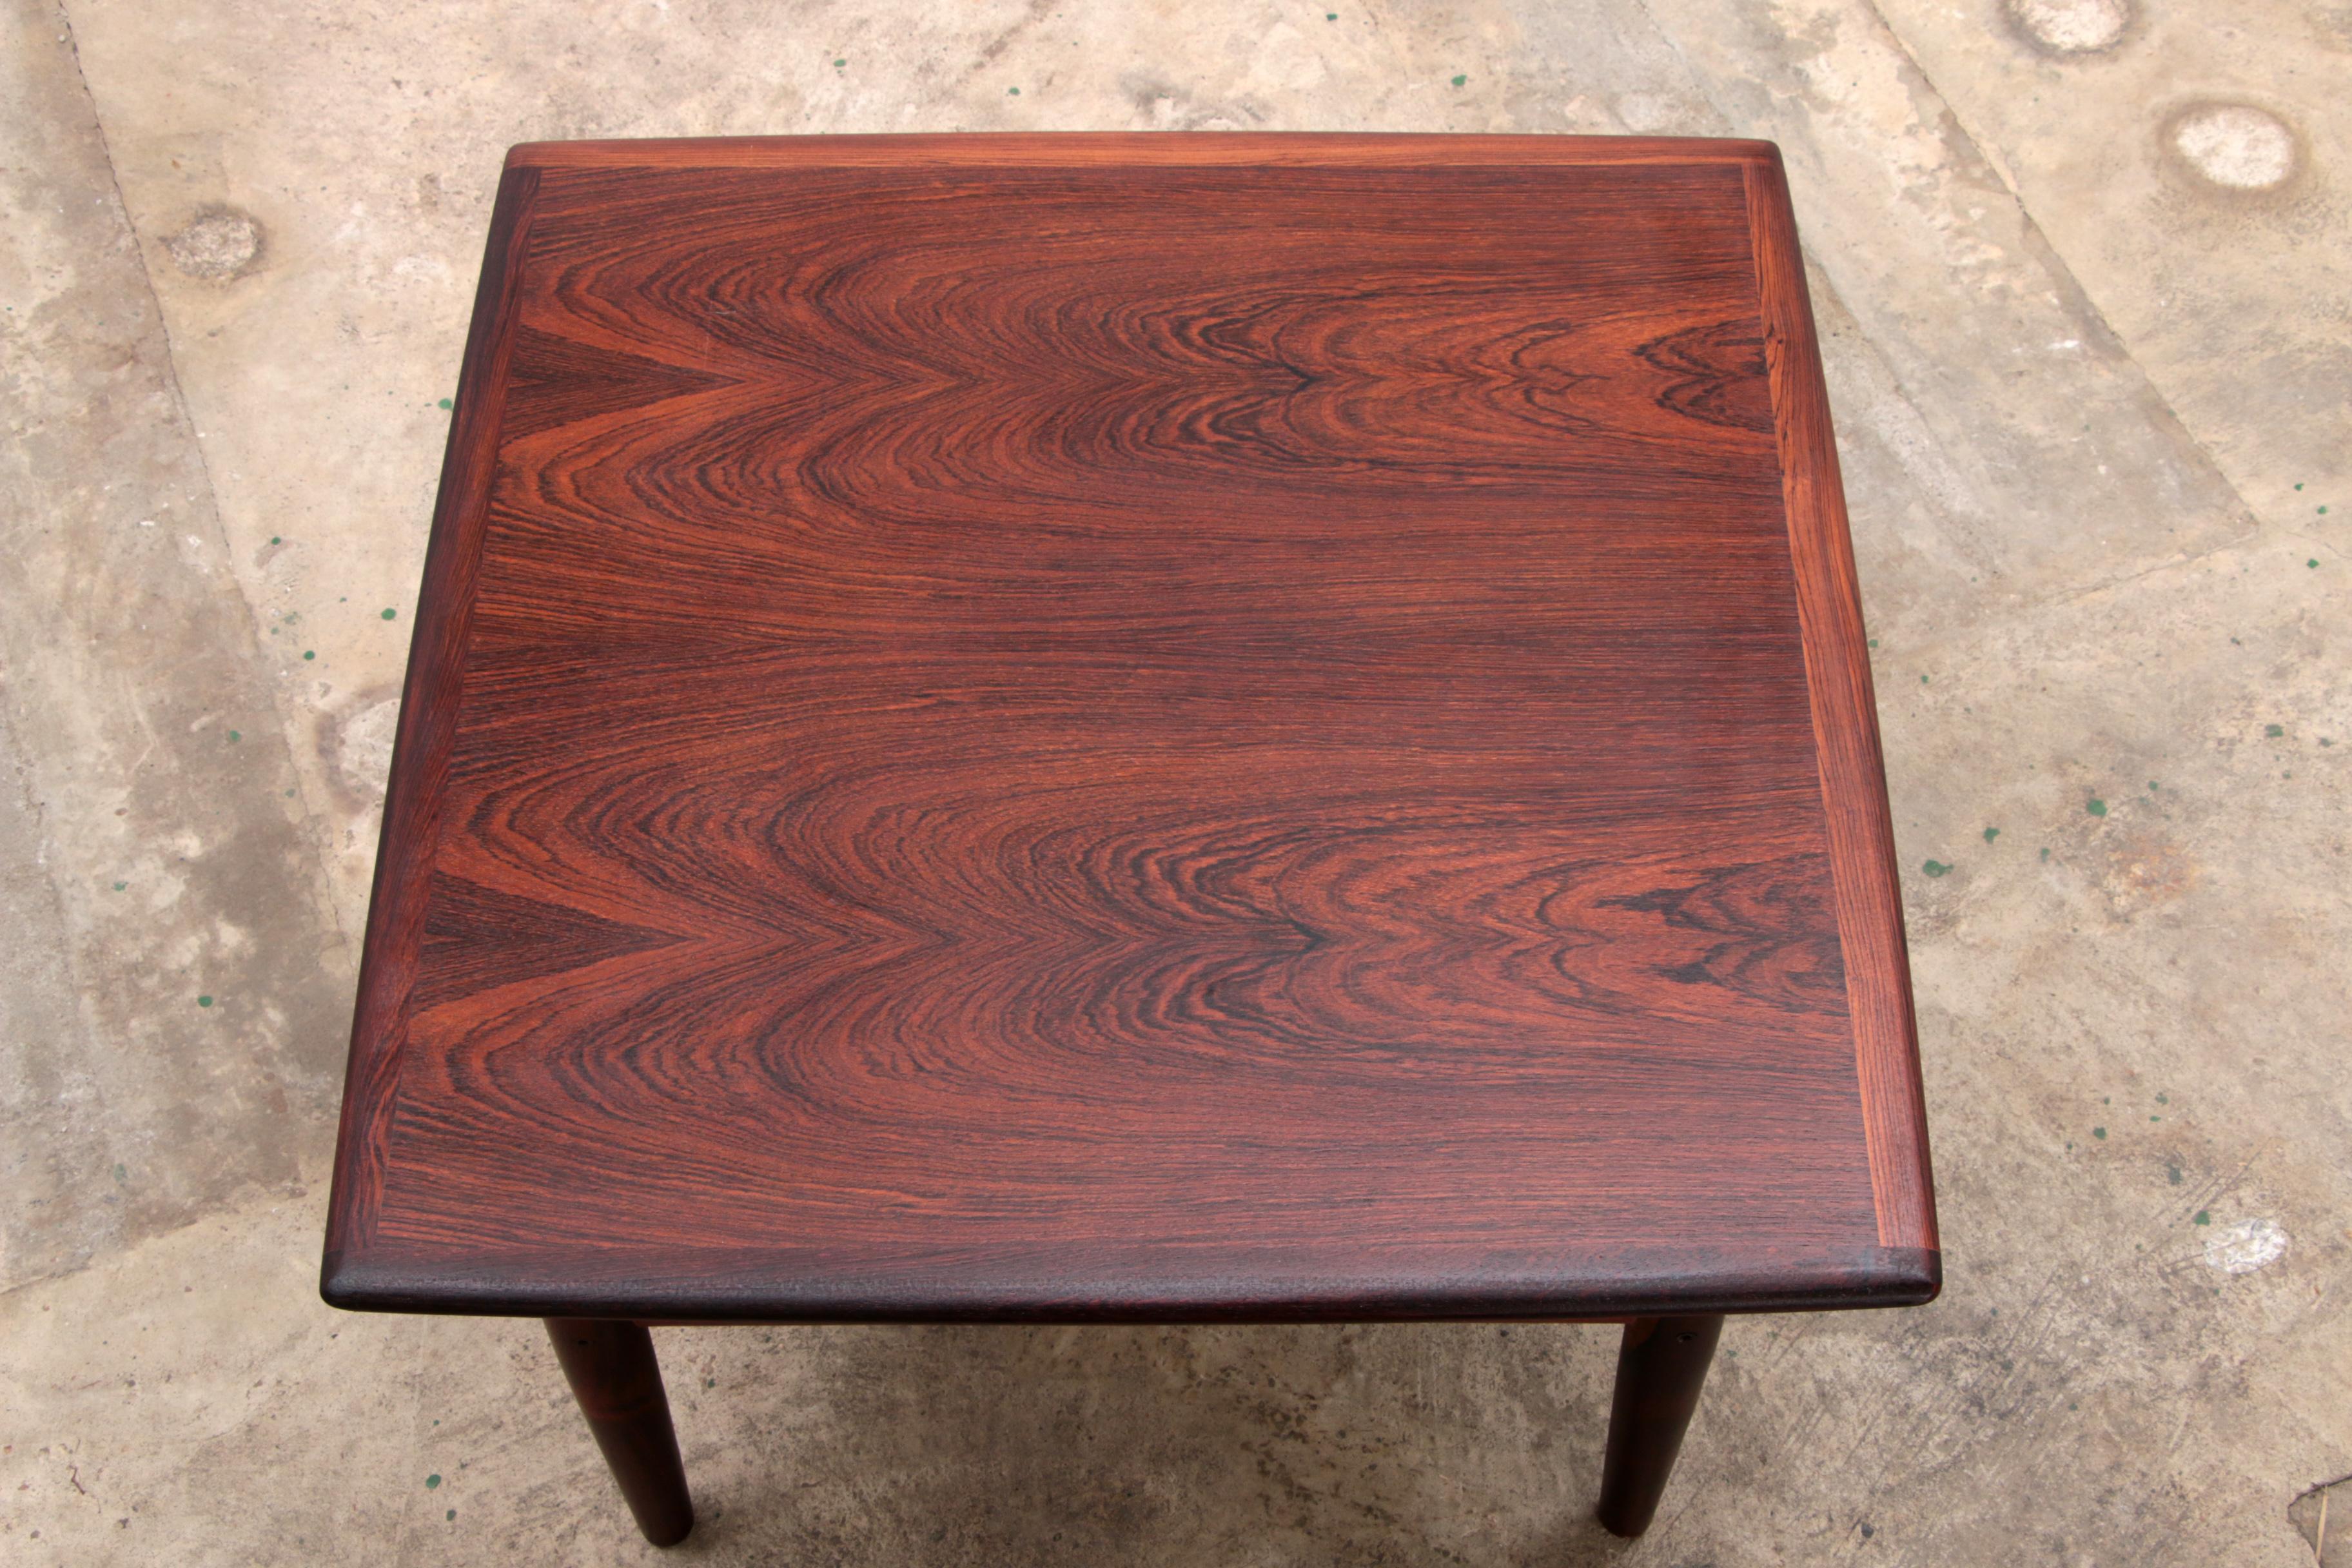 Rosewood Coffee Table by Grete Jalk for Glostrup, 1968 Denmark. For Sale 1